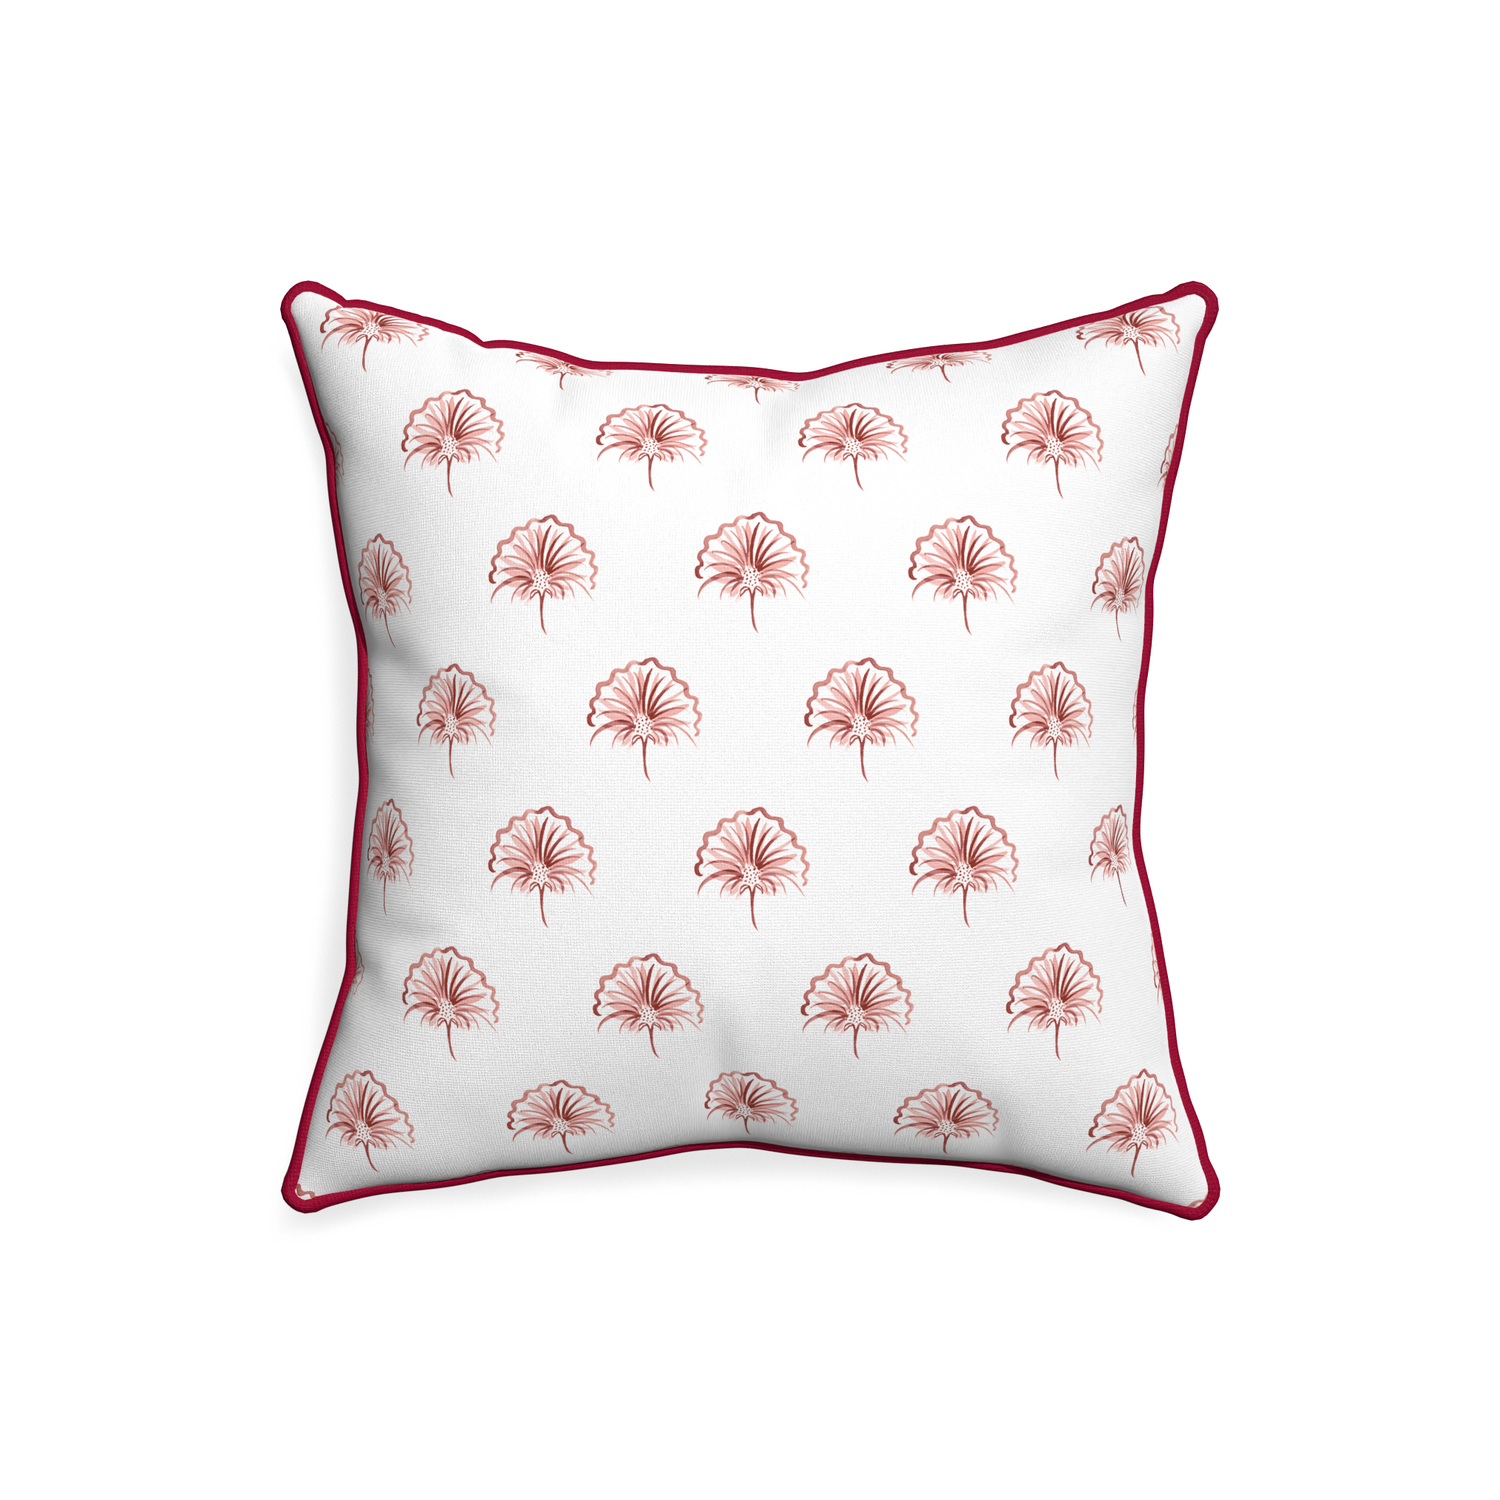 20-square penelope rose custom floral pinkpillow with raspberry piping on white background